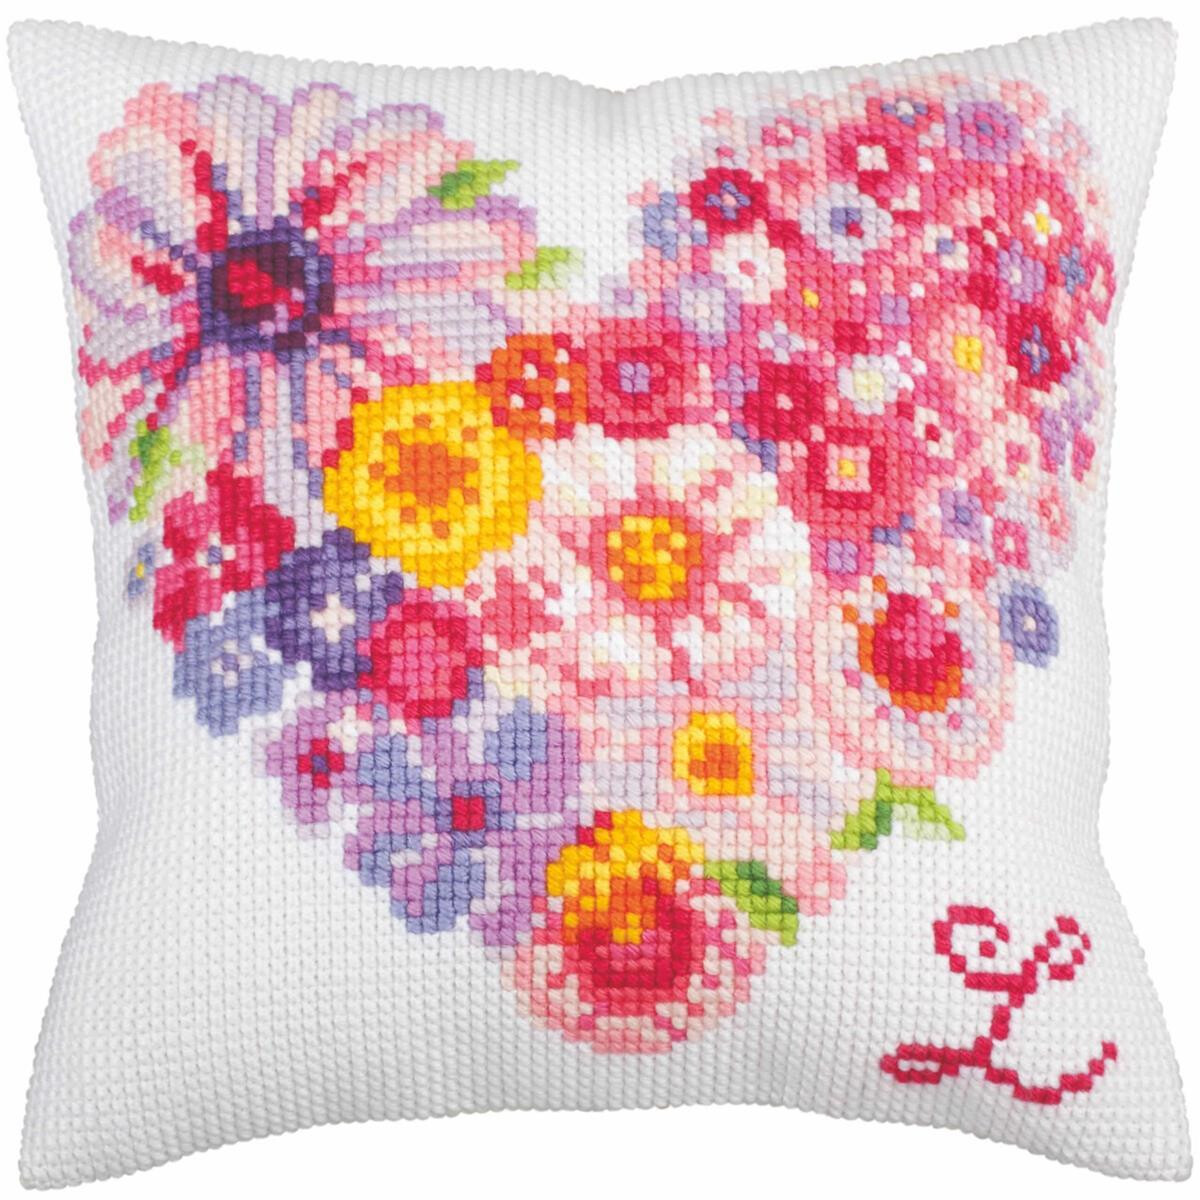 CdA stamped cross stitch kit cushion "For you"...